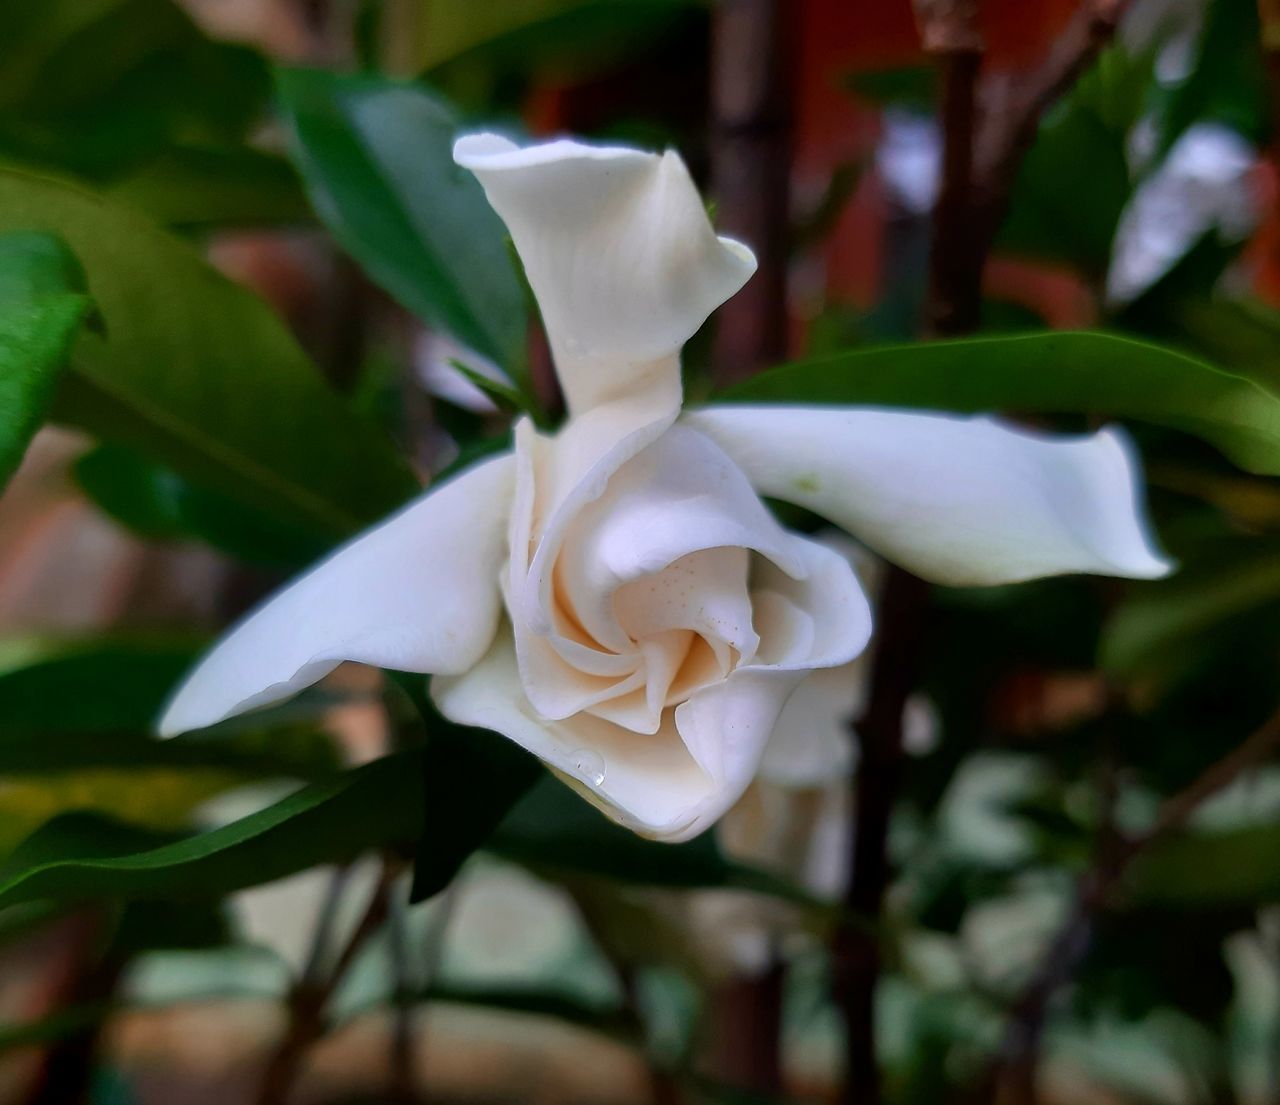 flower, plant, flowering plant, petal, beauty in nature, close-up, white, flower head, inflorescence, fragility, freshness, nature, leaf, plant part, no people, focus on foreground, growth, rose, outdoors, gardenia, botany